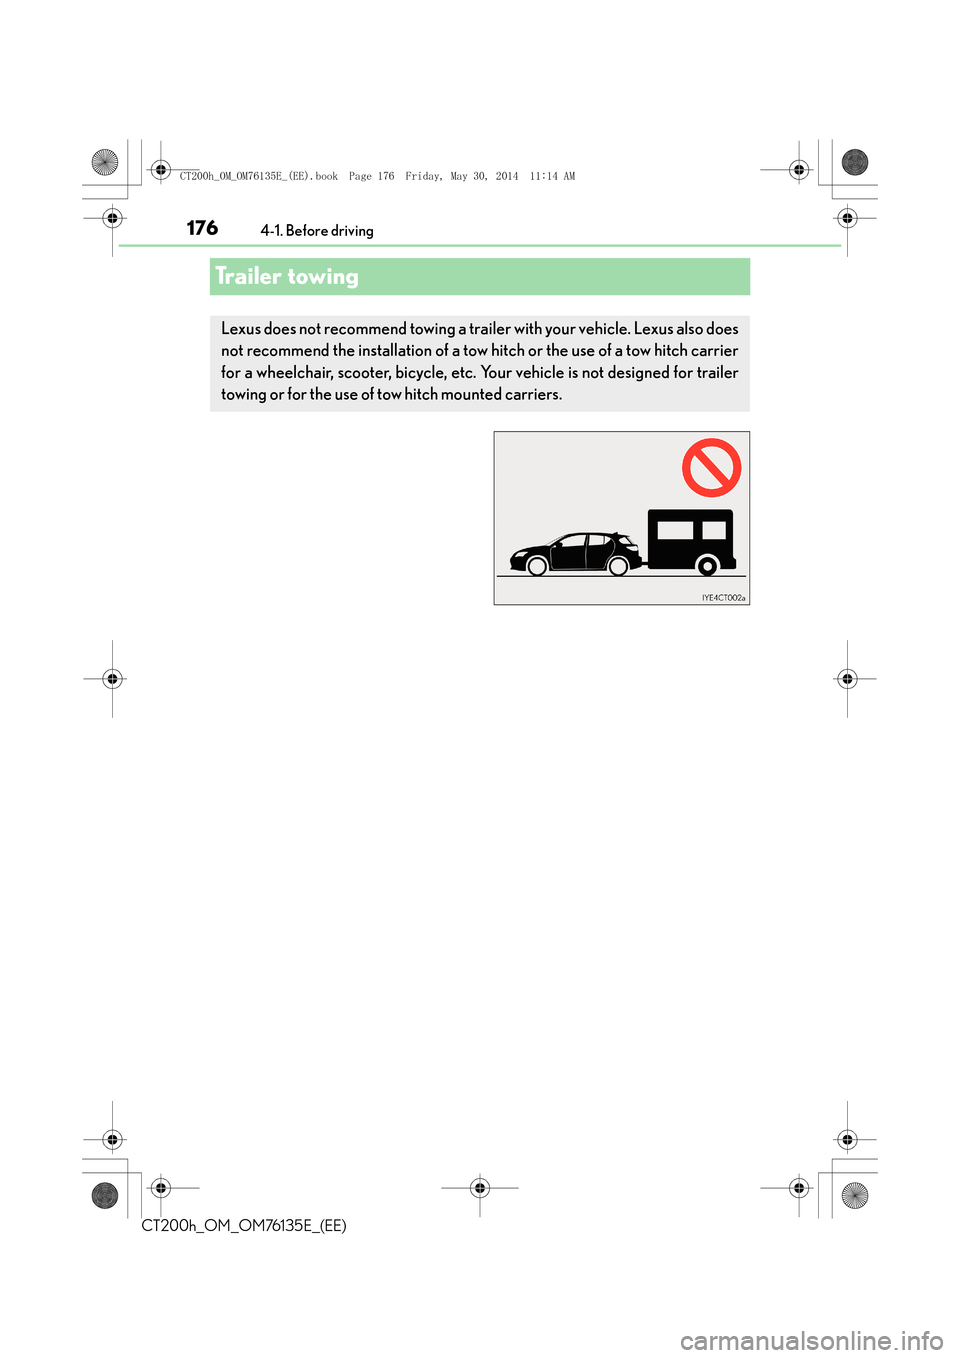 Lexus CT200h 2014  Owners Manual (in English) 1764-1. Before driving
CT200h_OM_OM76135E_(EE)
Trailer towing
Lexus does not recommend towing a trailer with your vehicle. Lexus also does
not recommend the installation of a tow hitch or the use of a